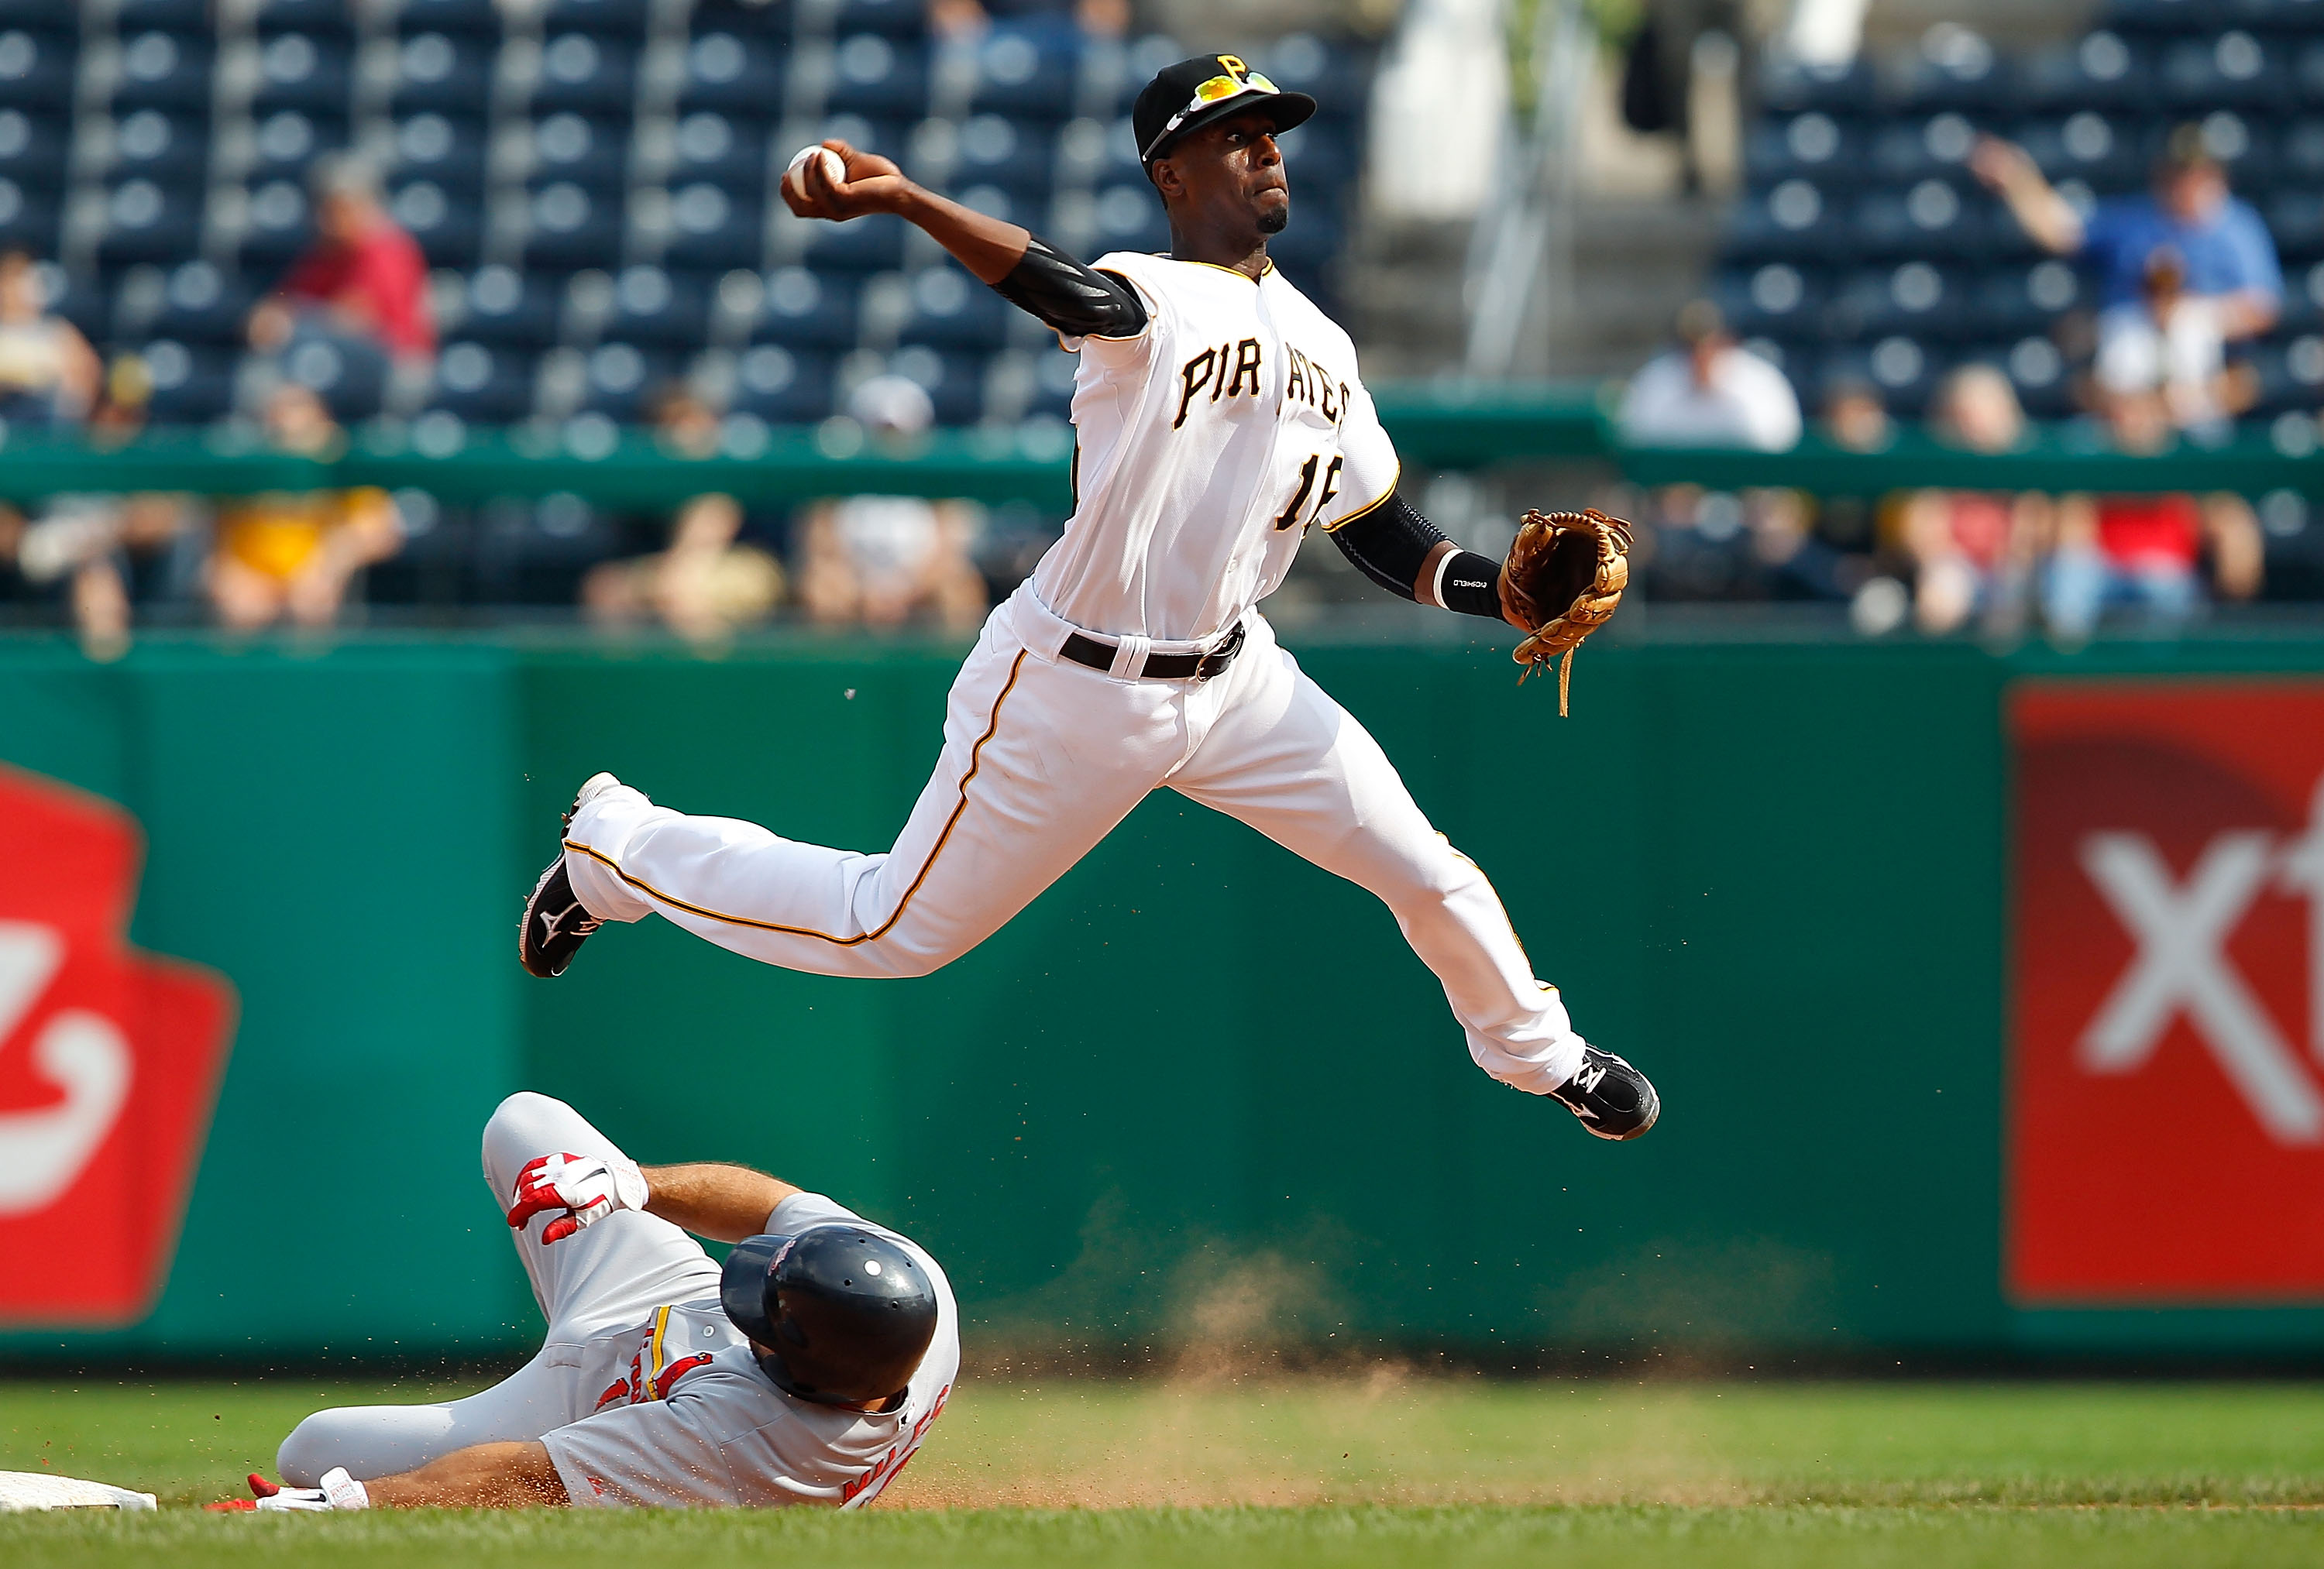 PITTSBURGH - SEPTEMBER 23:  Pedro Ciriaco #16 of the Pittsburgh Pirates turns a double play against the St Louis Cardinals during the game on September 23, 2010 at PNC Park in Pittsburgh, Pennsylvania.  (Photo by Jared Wickerham/Getty Images)